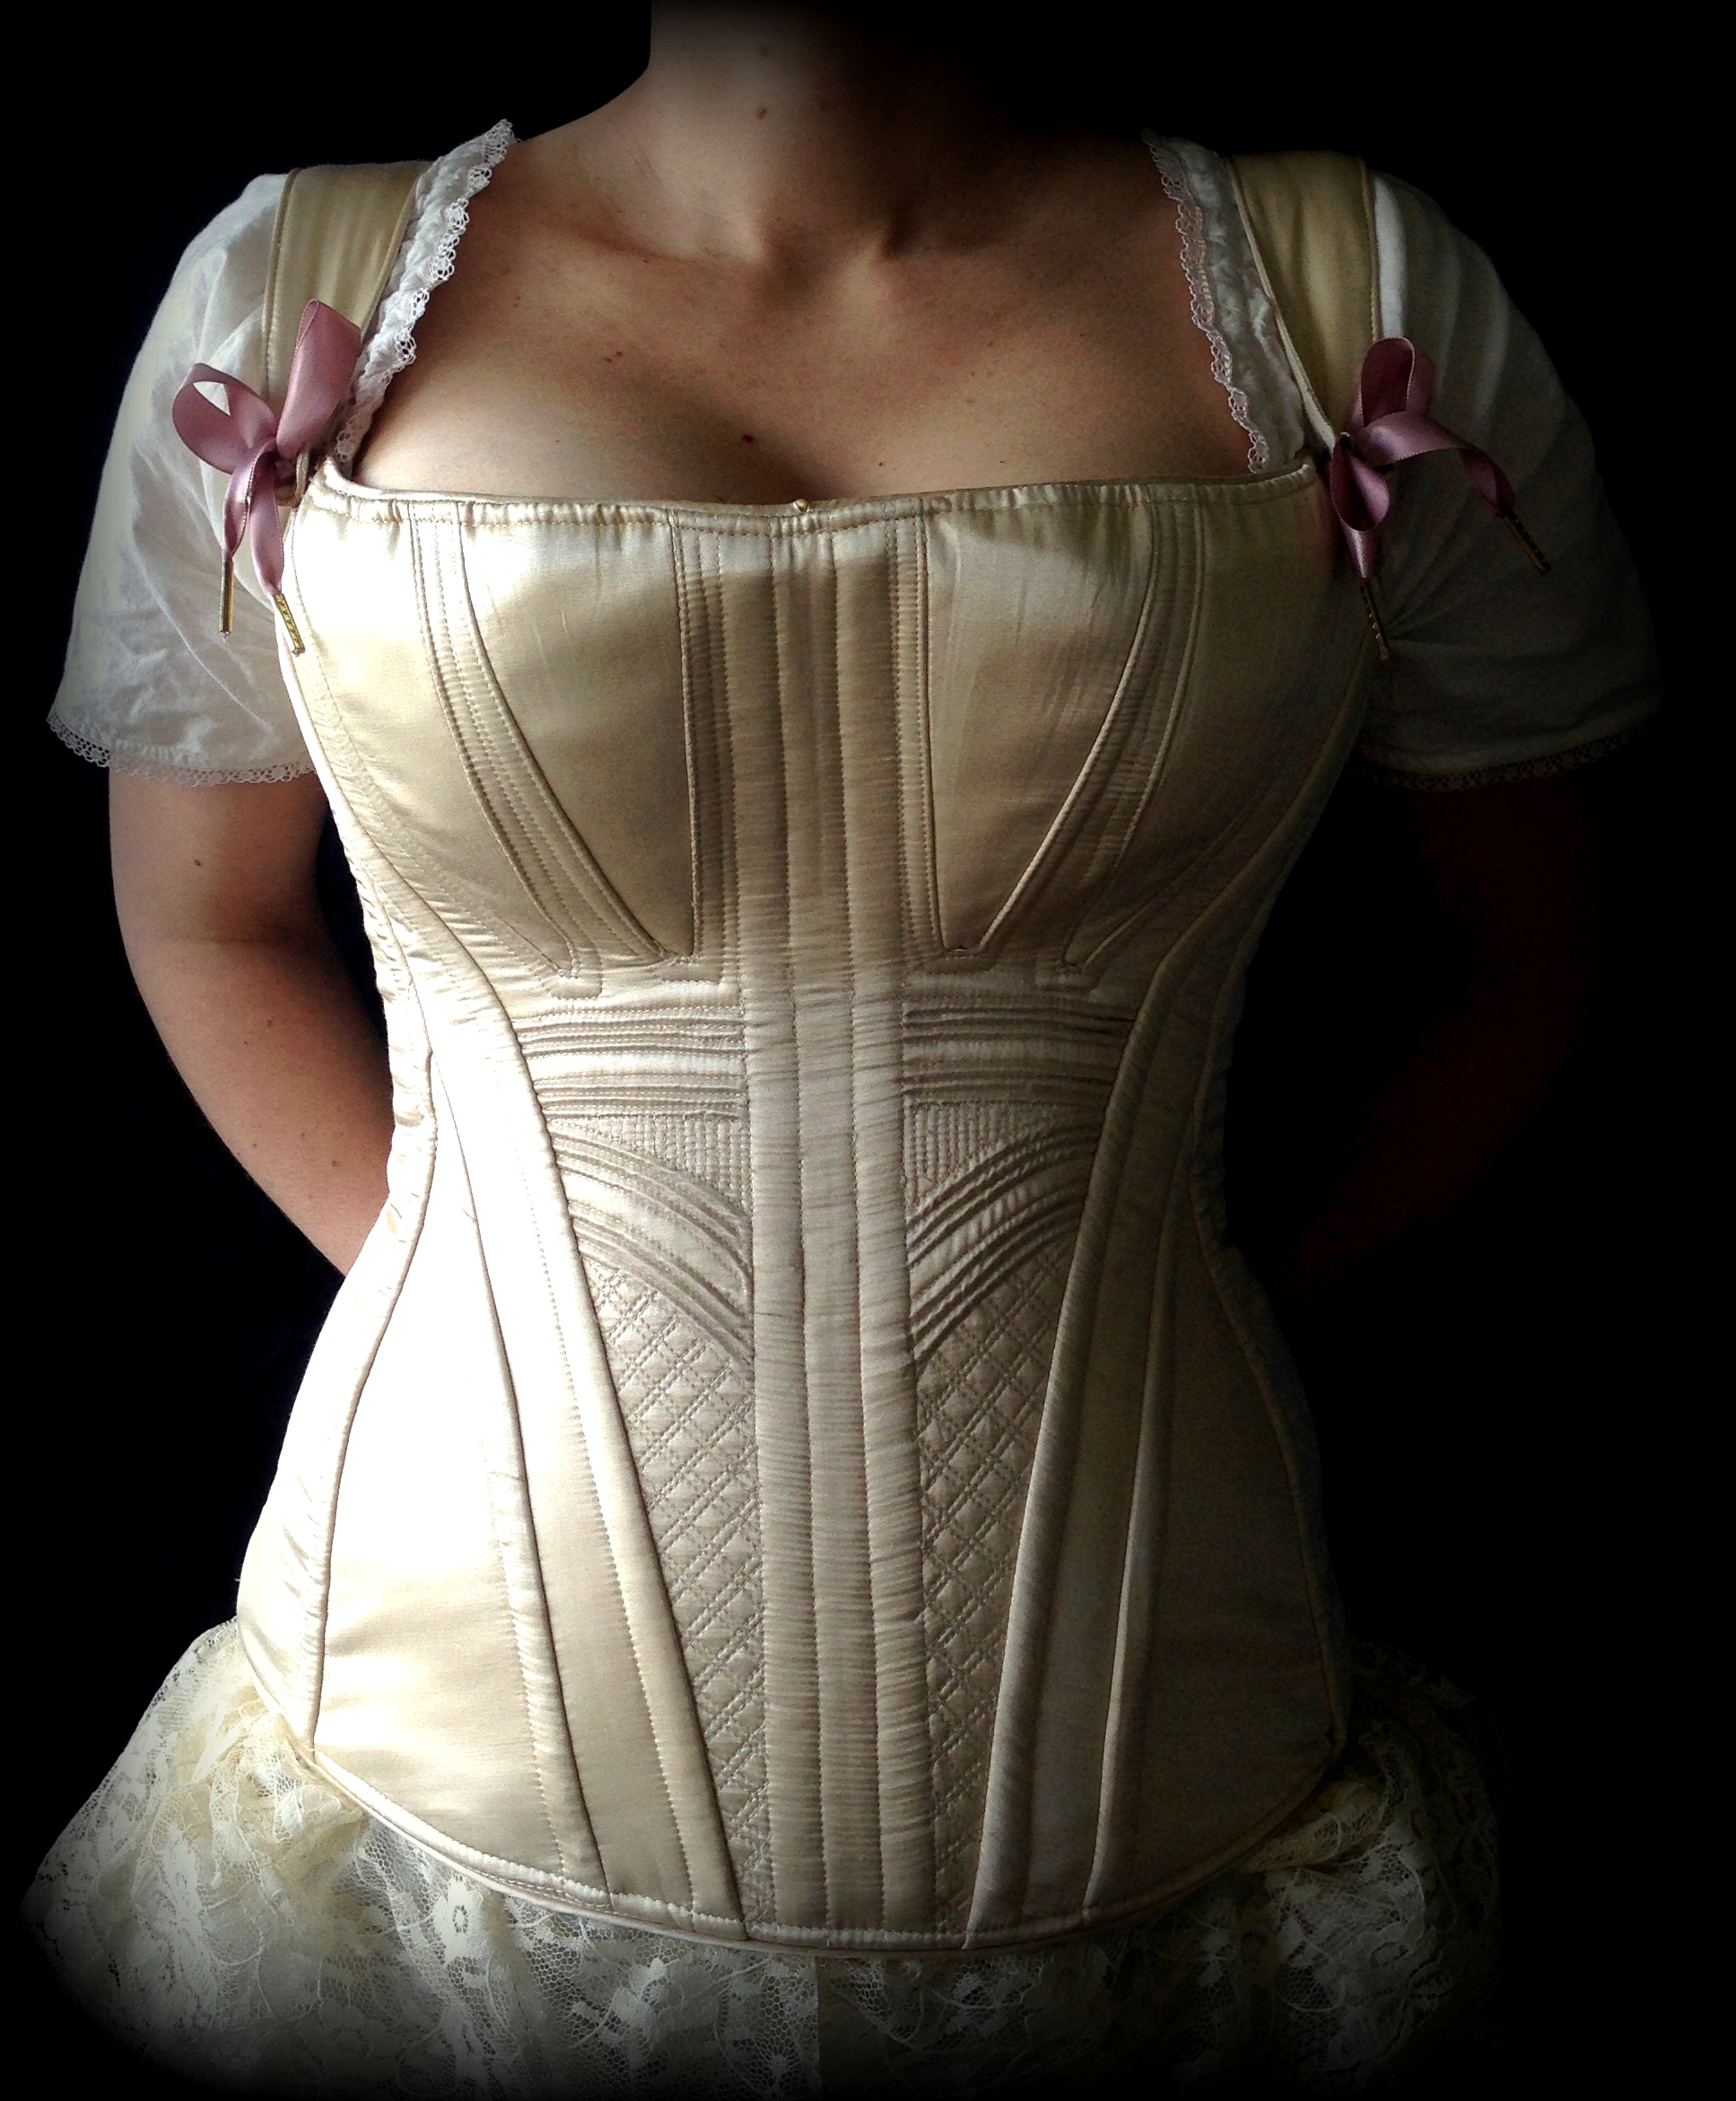 Bespoke Corsets and Costumes — Period Corsets